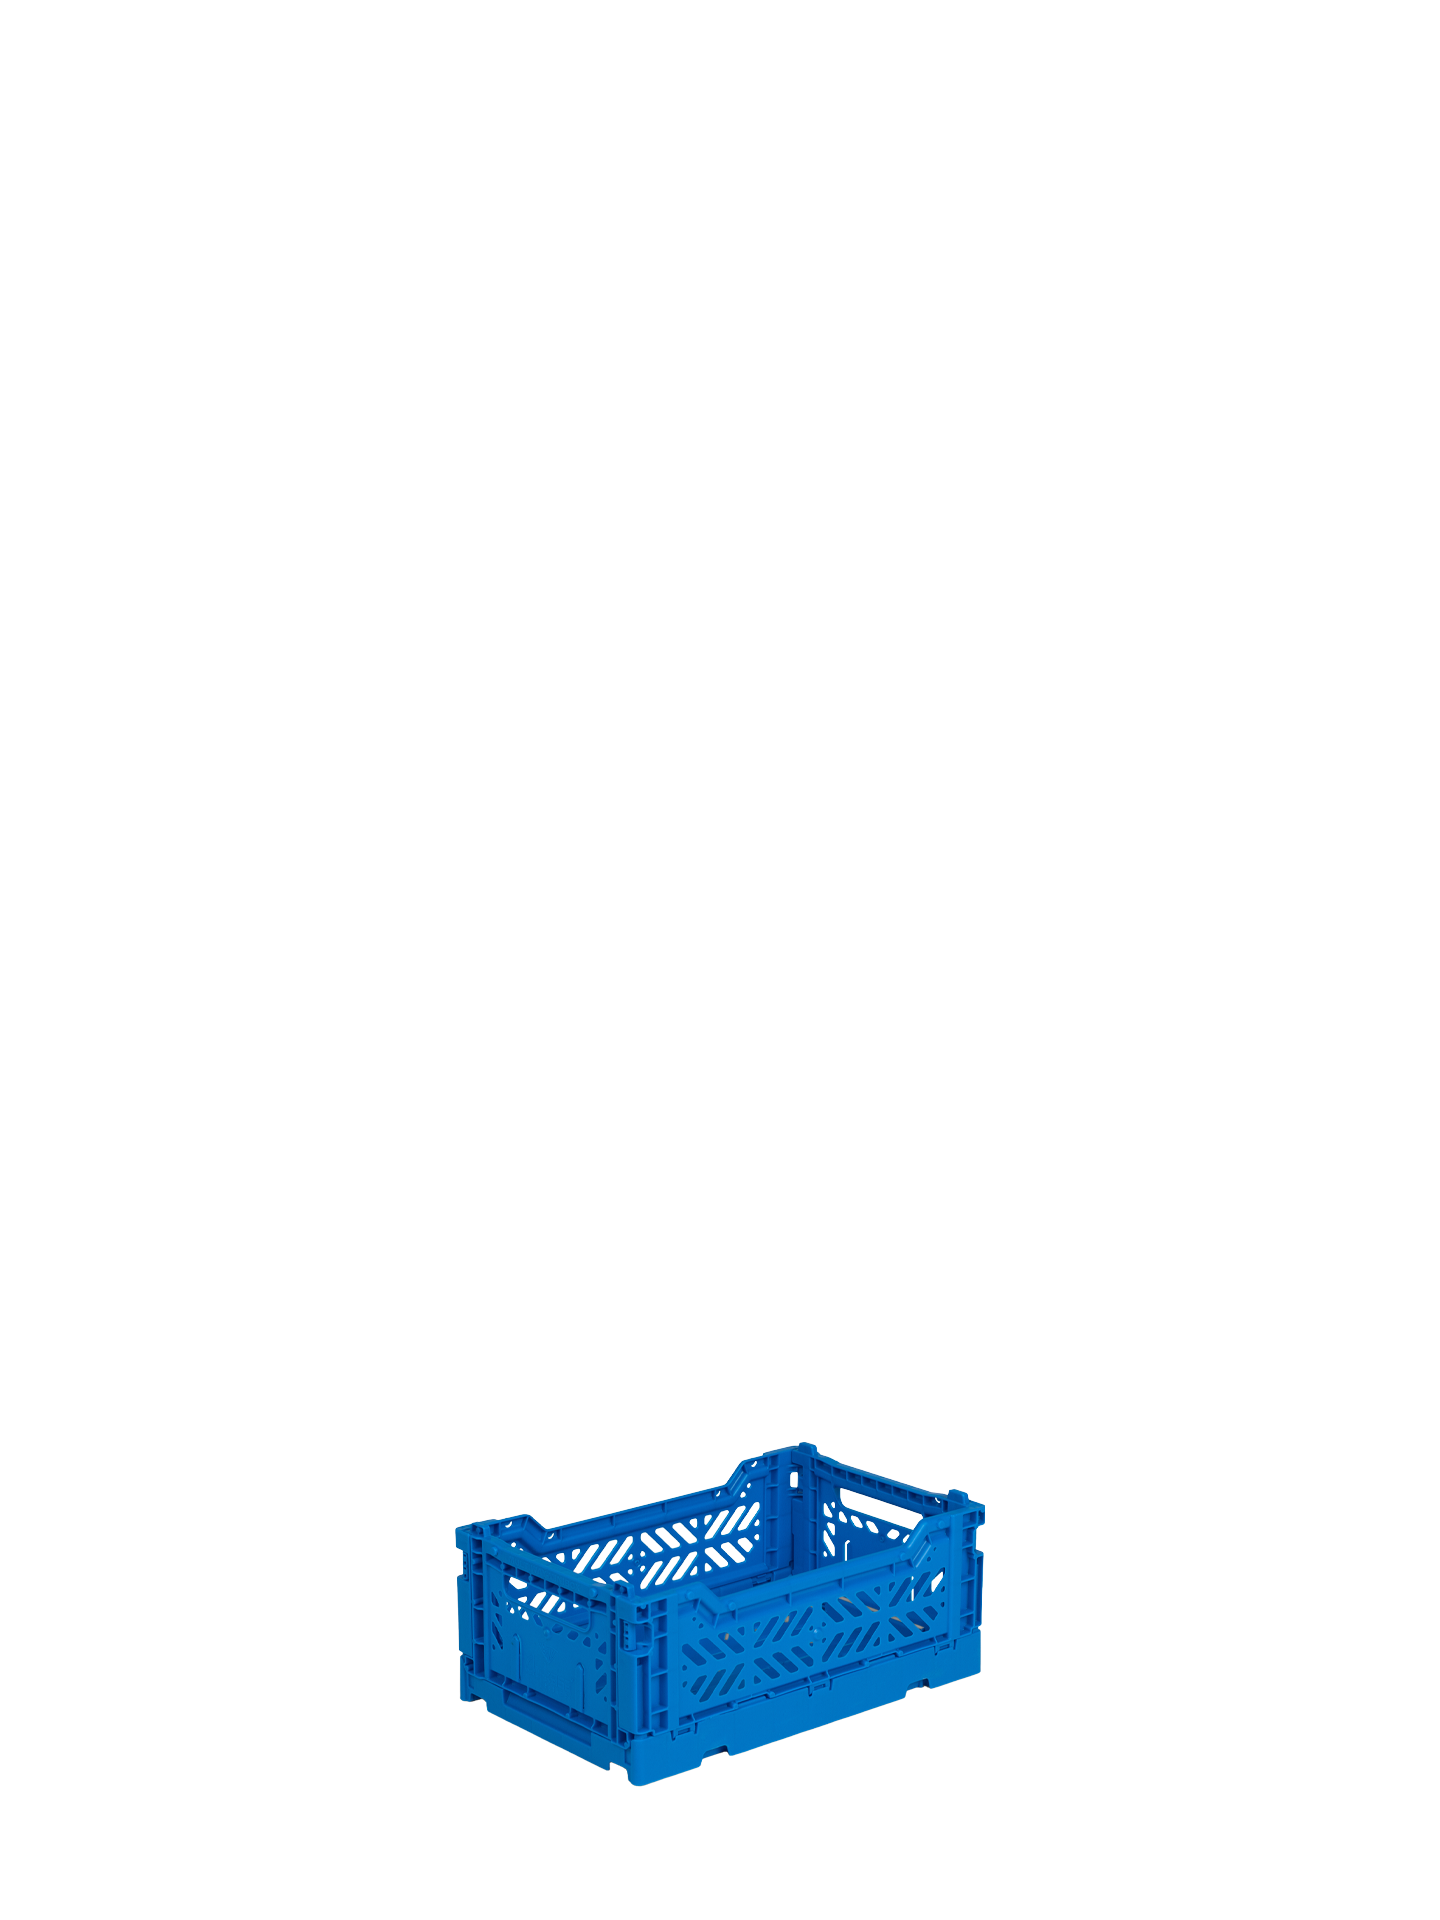 Mini Aykasa crate in electric blue stacks and folds